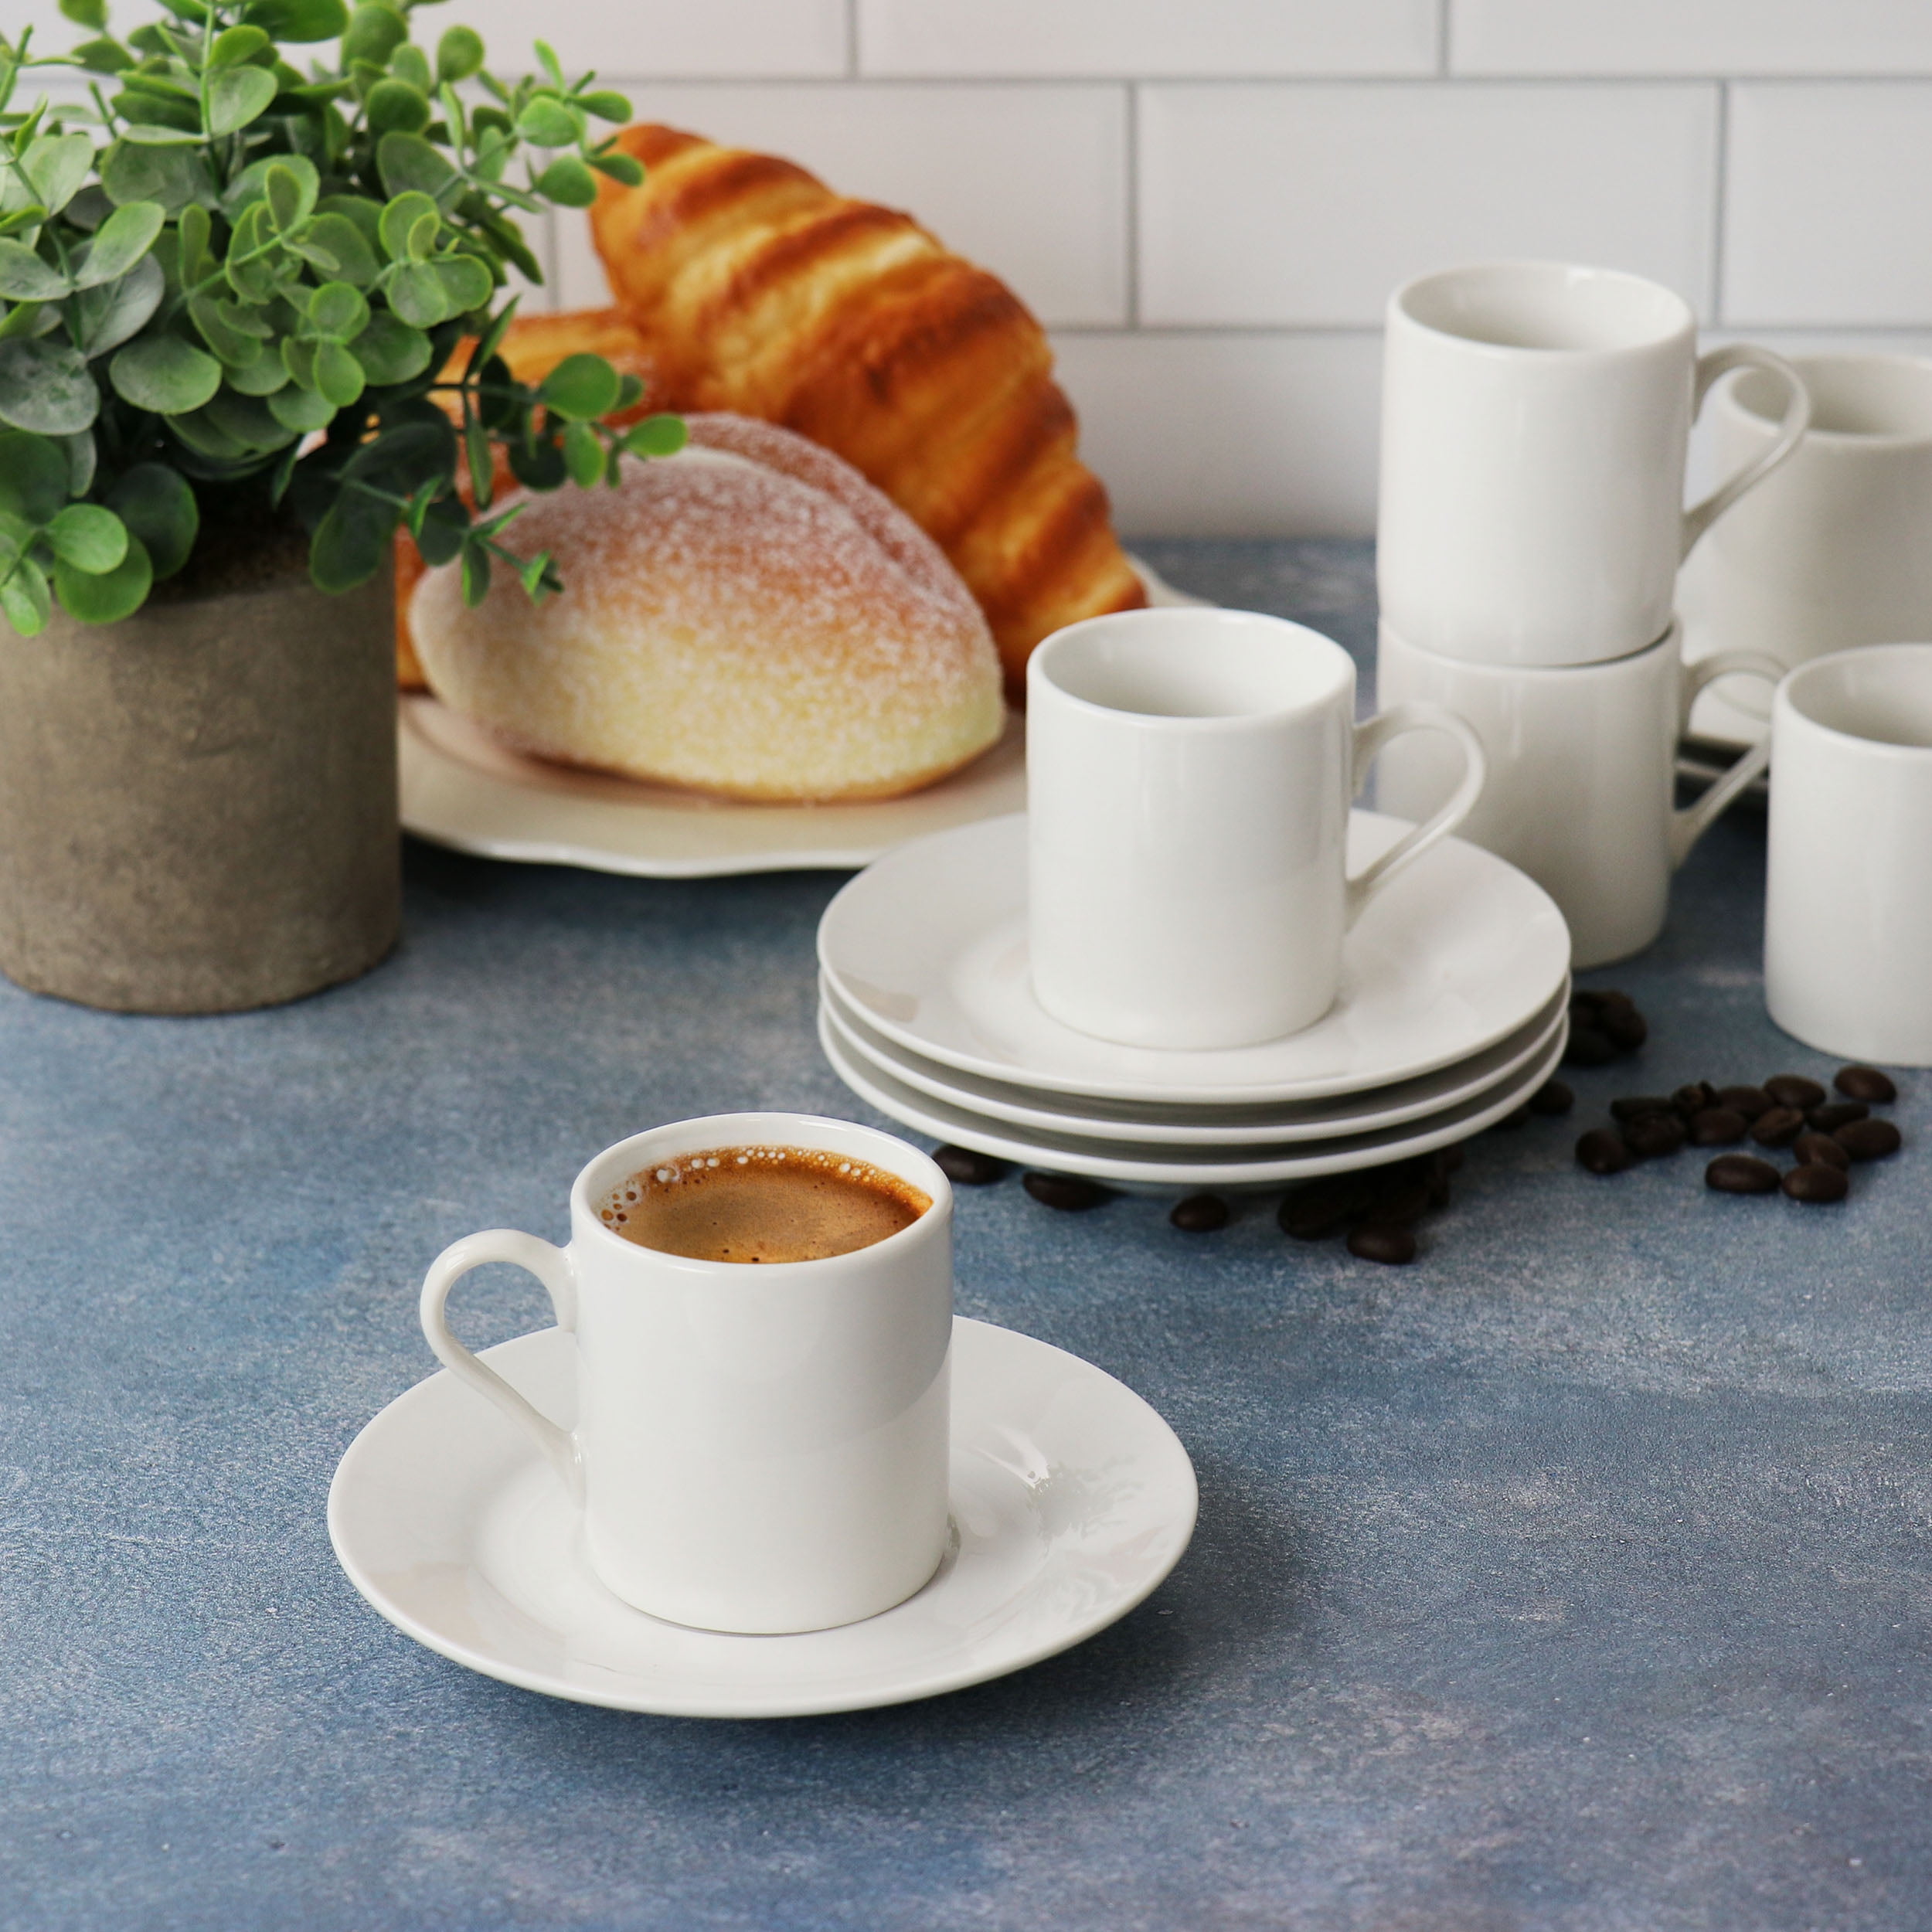 OUR TABLE Simply White Fine Ceramic 6 Piece 8 oz. Square Cup and